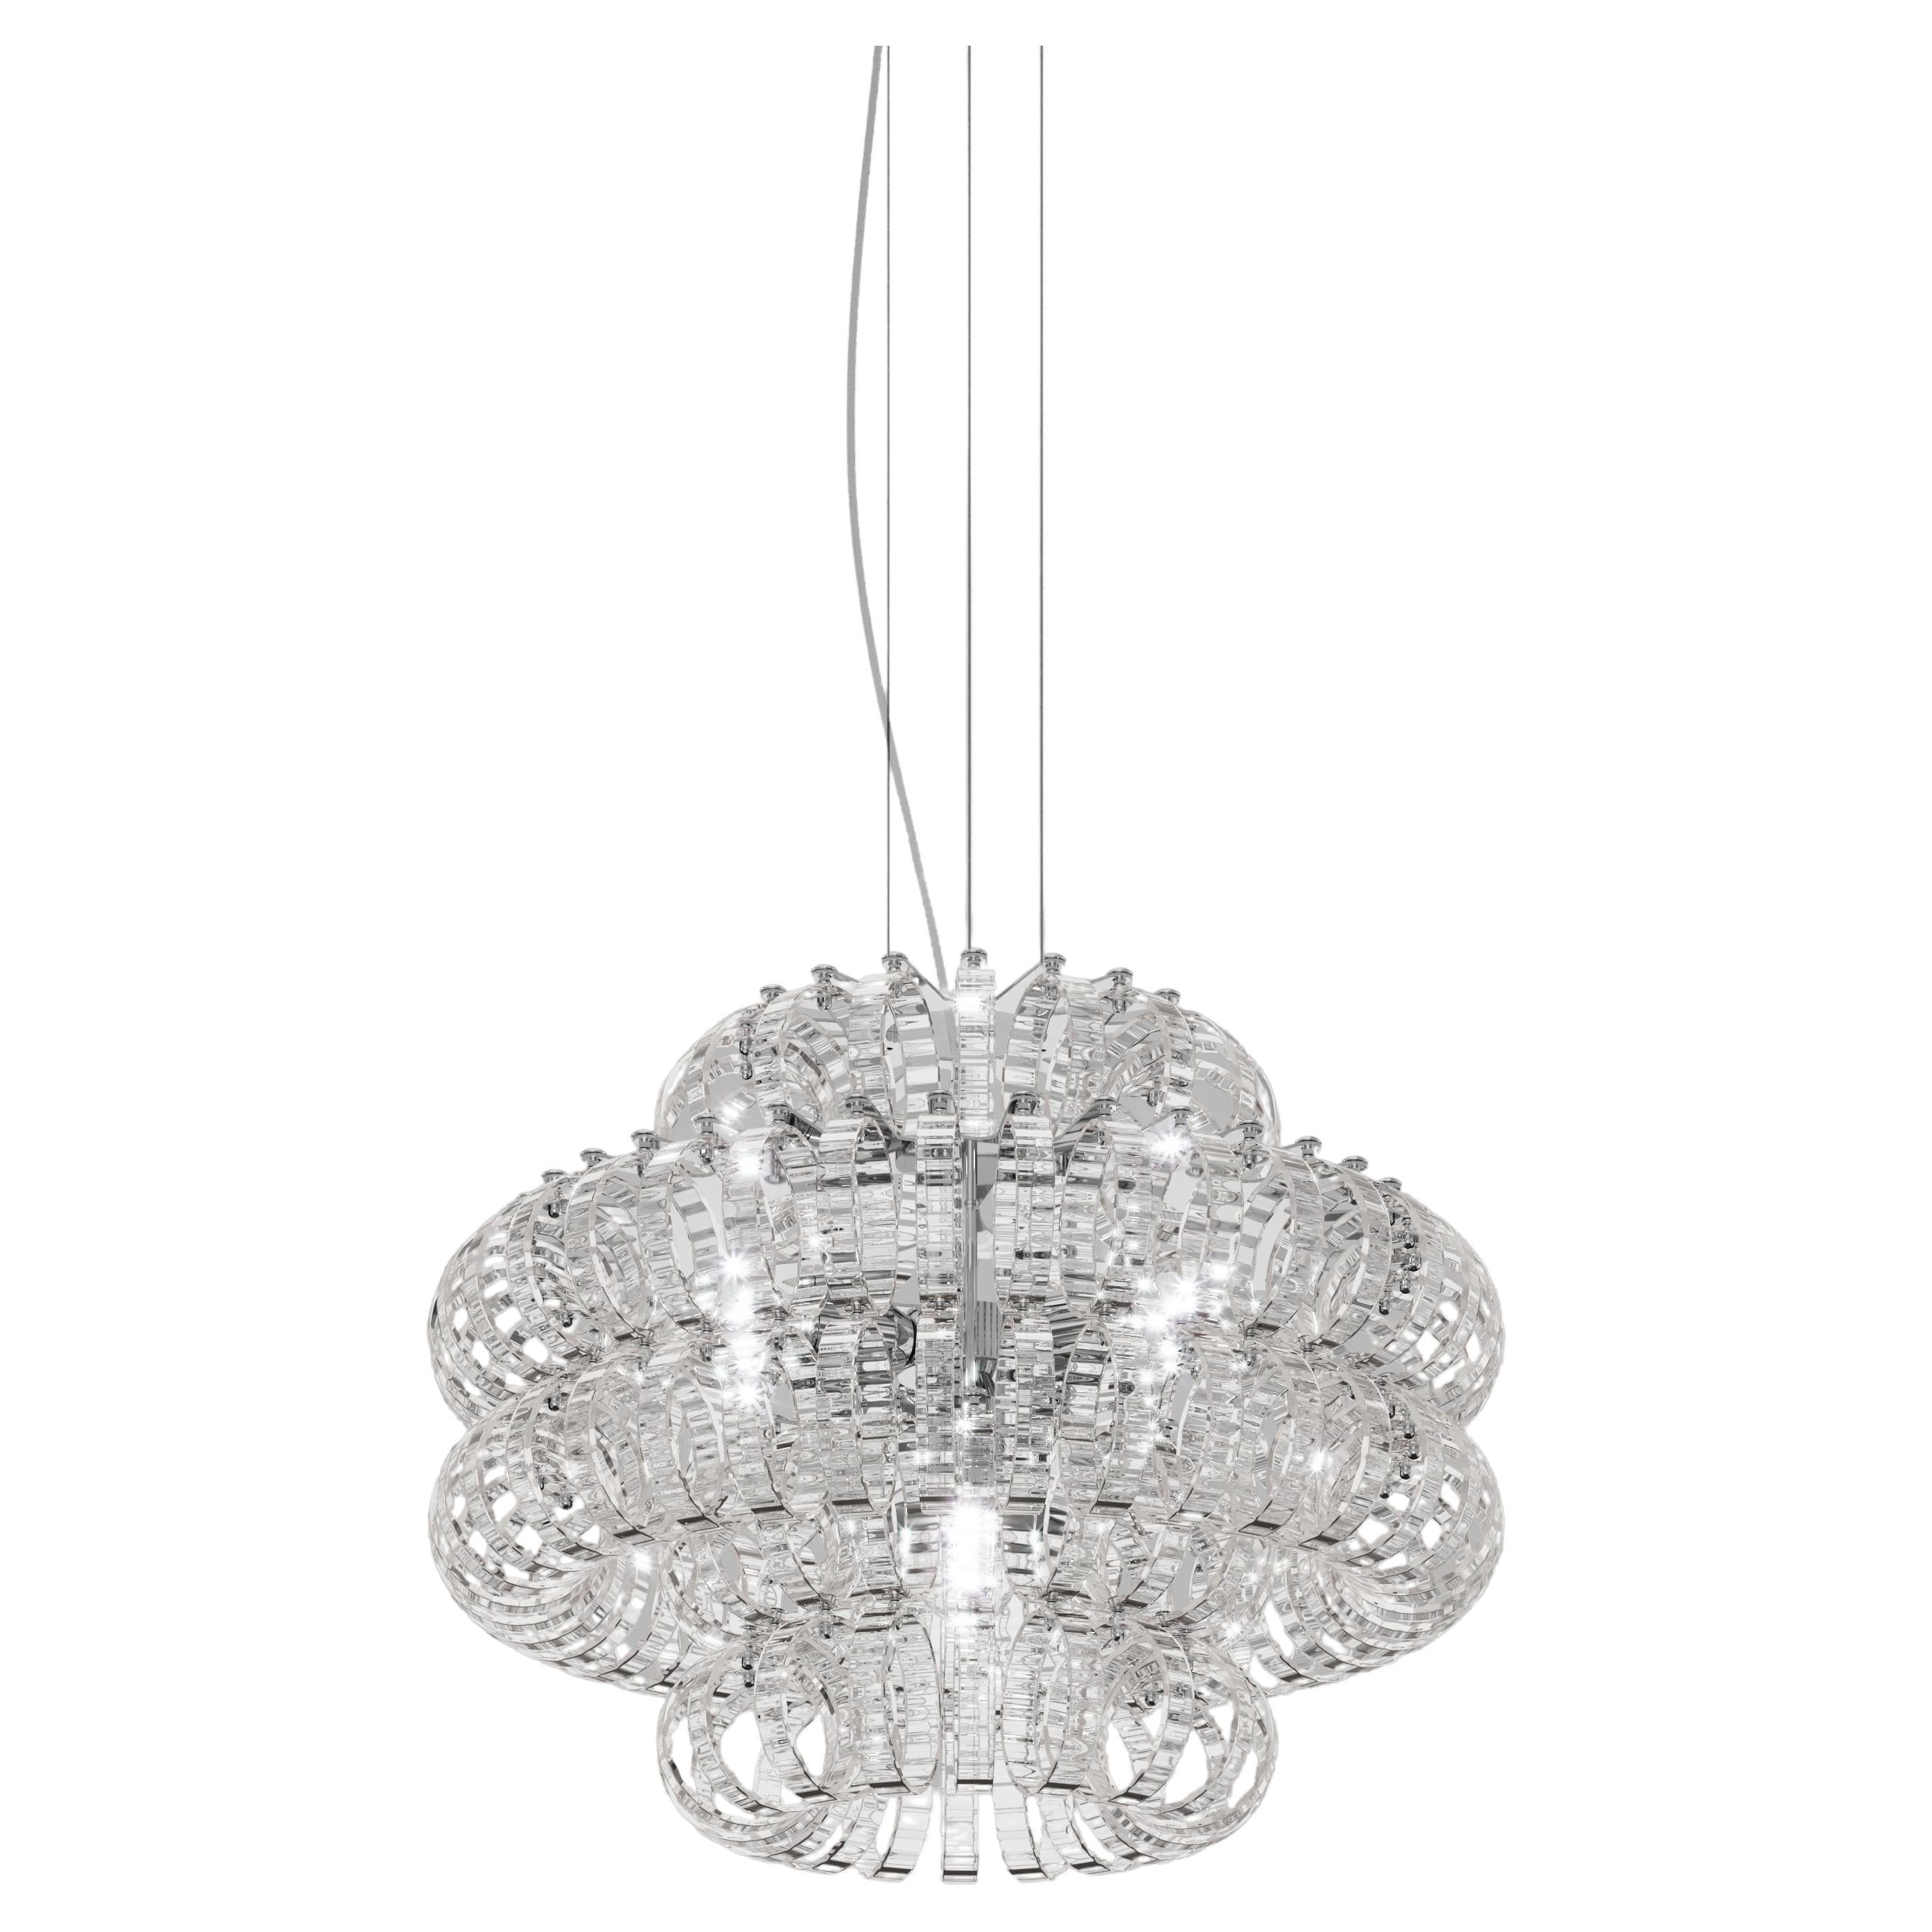 Vistosi Ecos Pendant Light in Crystal Striped Glass And Glossy Chrome Frame